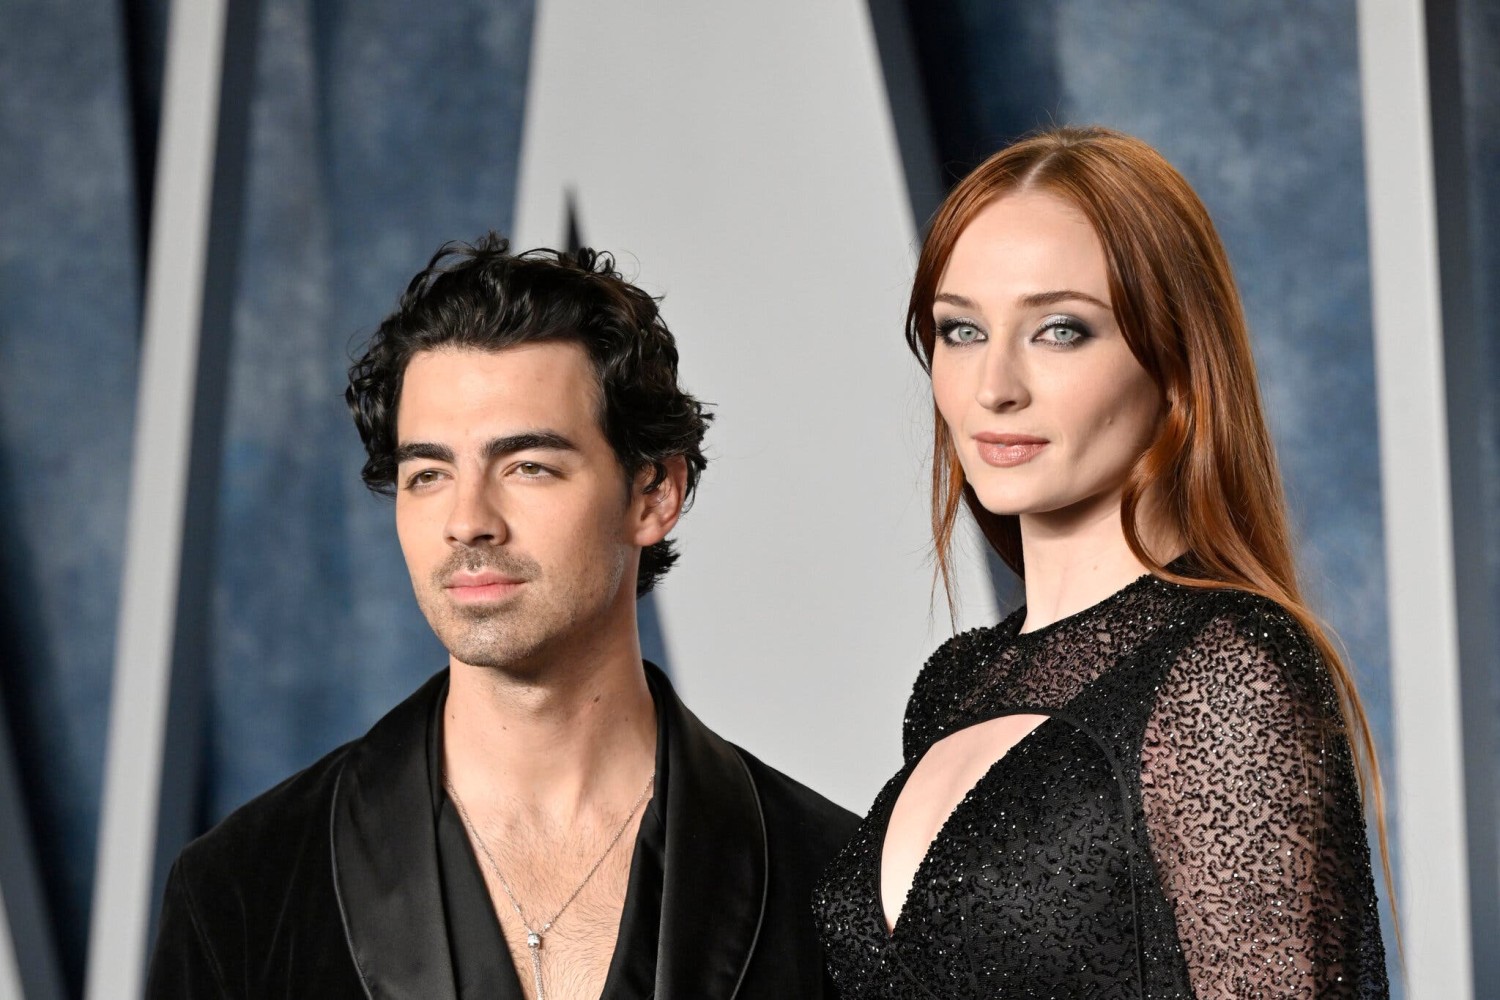 After Joe Jonas and Sophie Turner announced their divorce, tabloid stories seemingly portraying Turner negatively were roundly criticized. Credit...Evan Agostini/Invision, via Associated Press